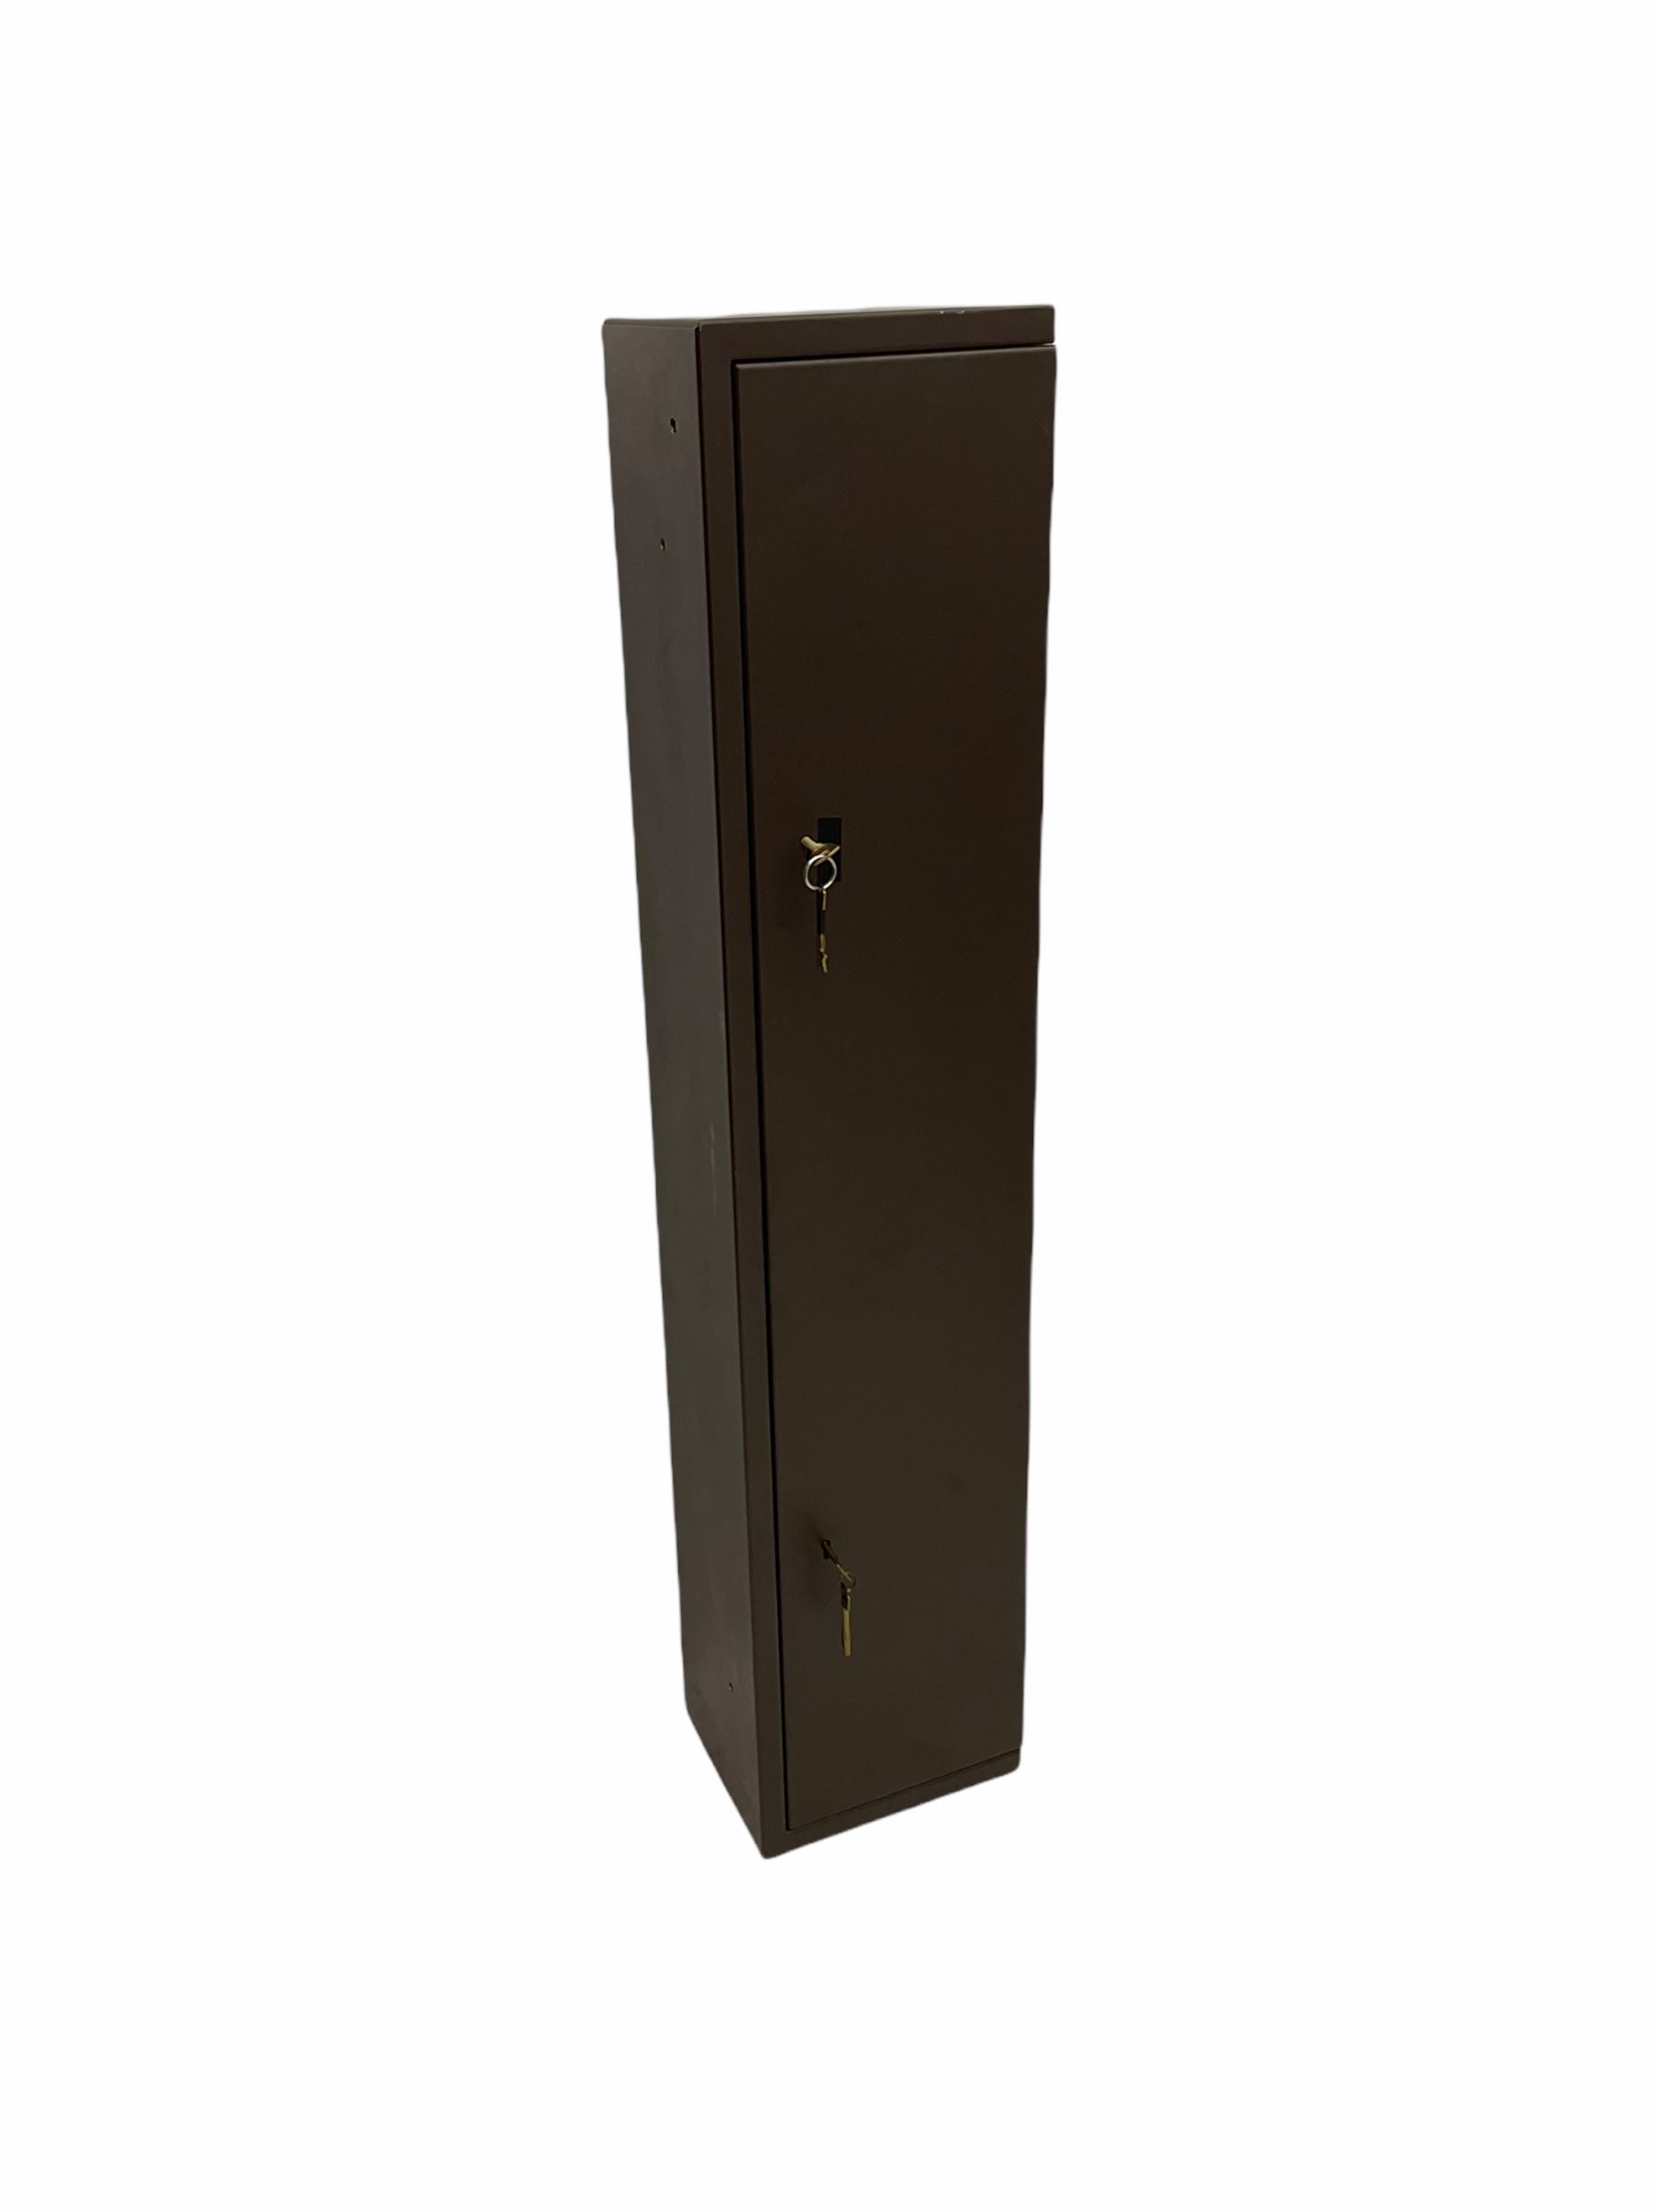 Brown steel gun cabinet for four guns with ammunition rack on back of door